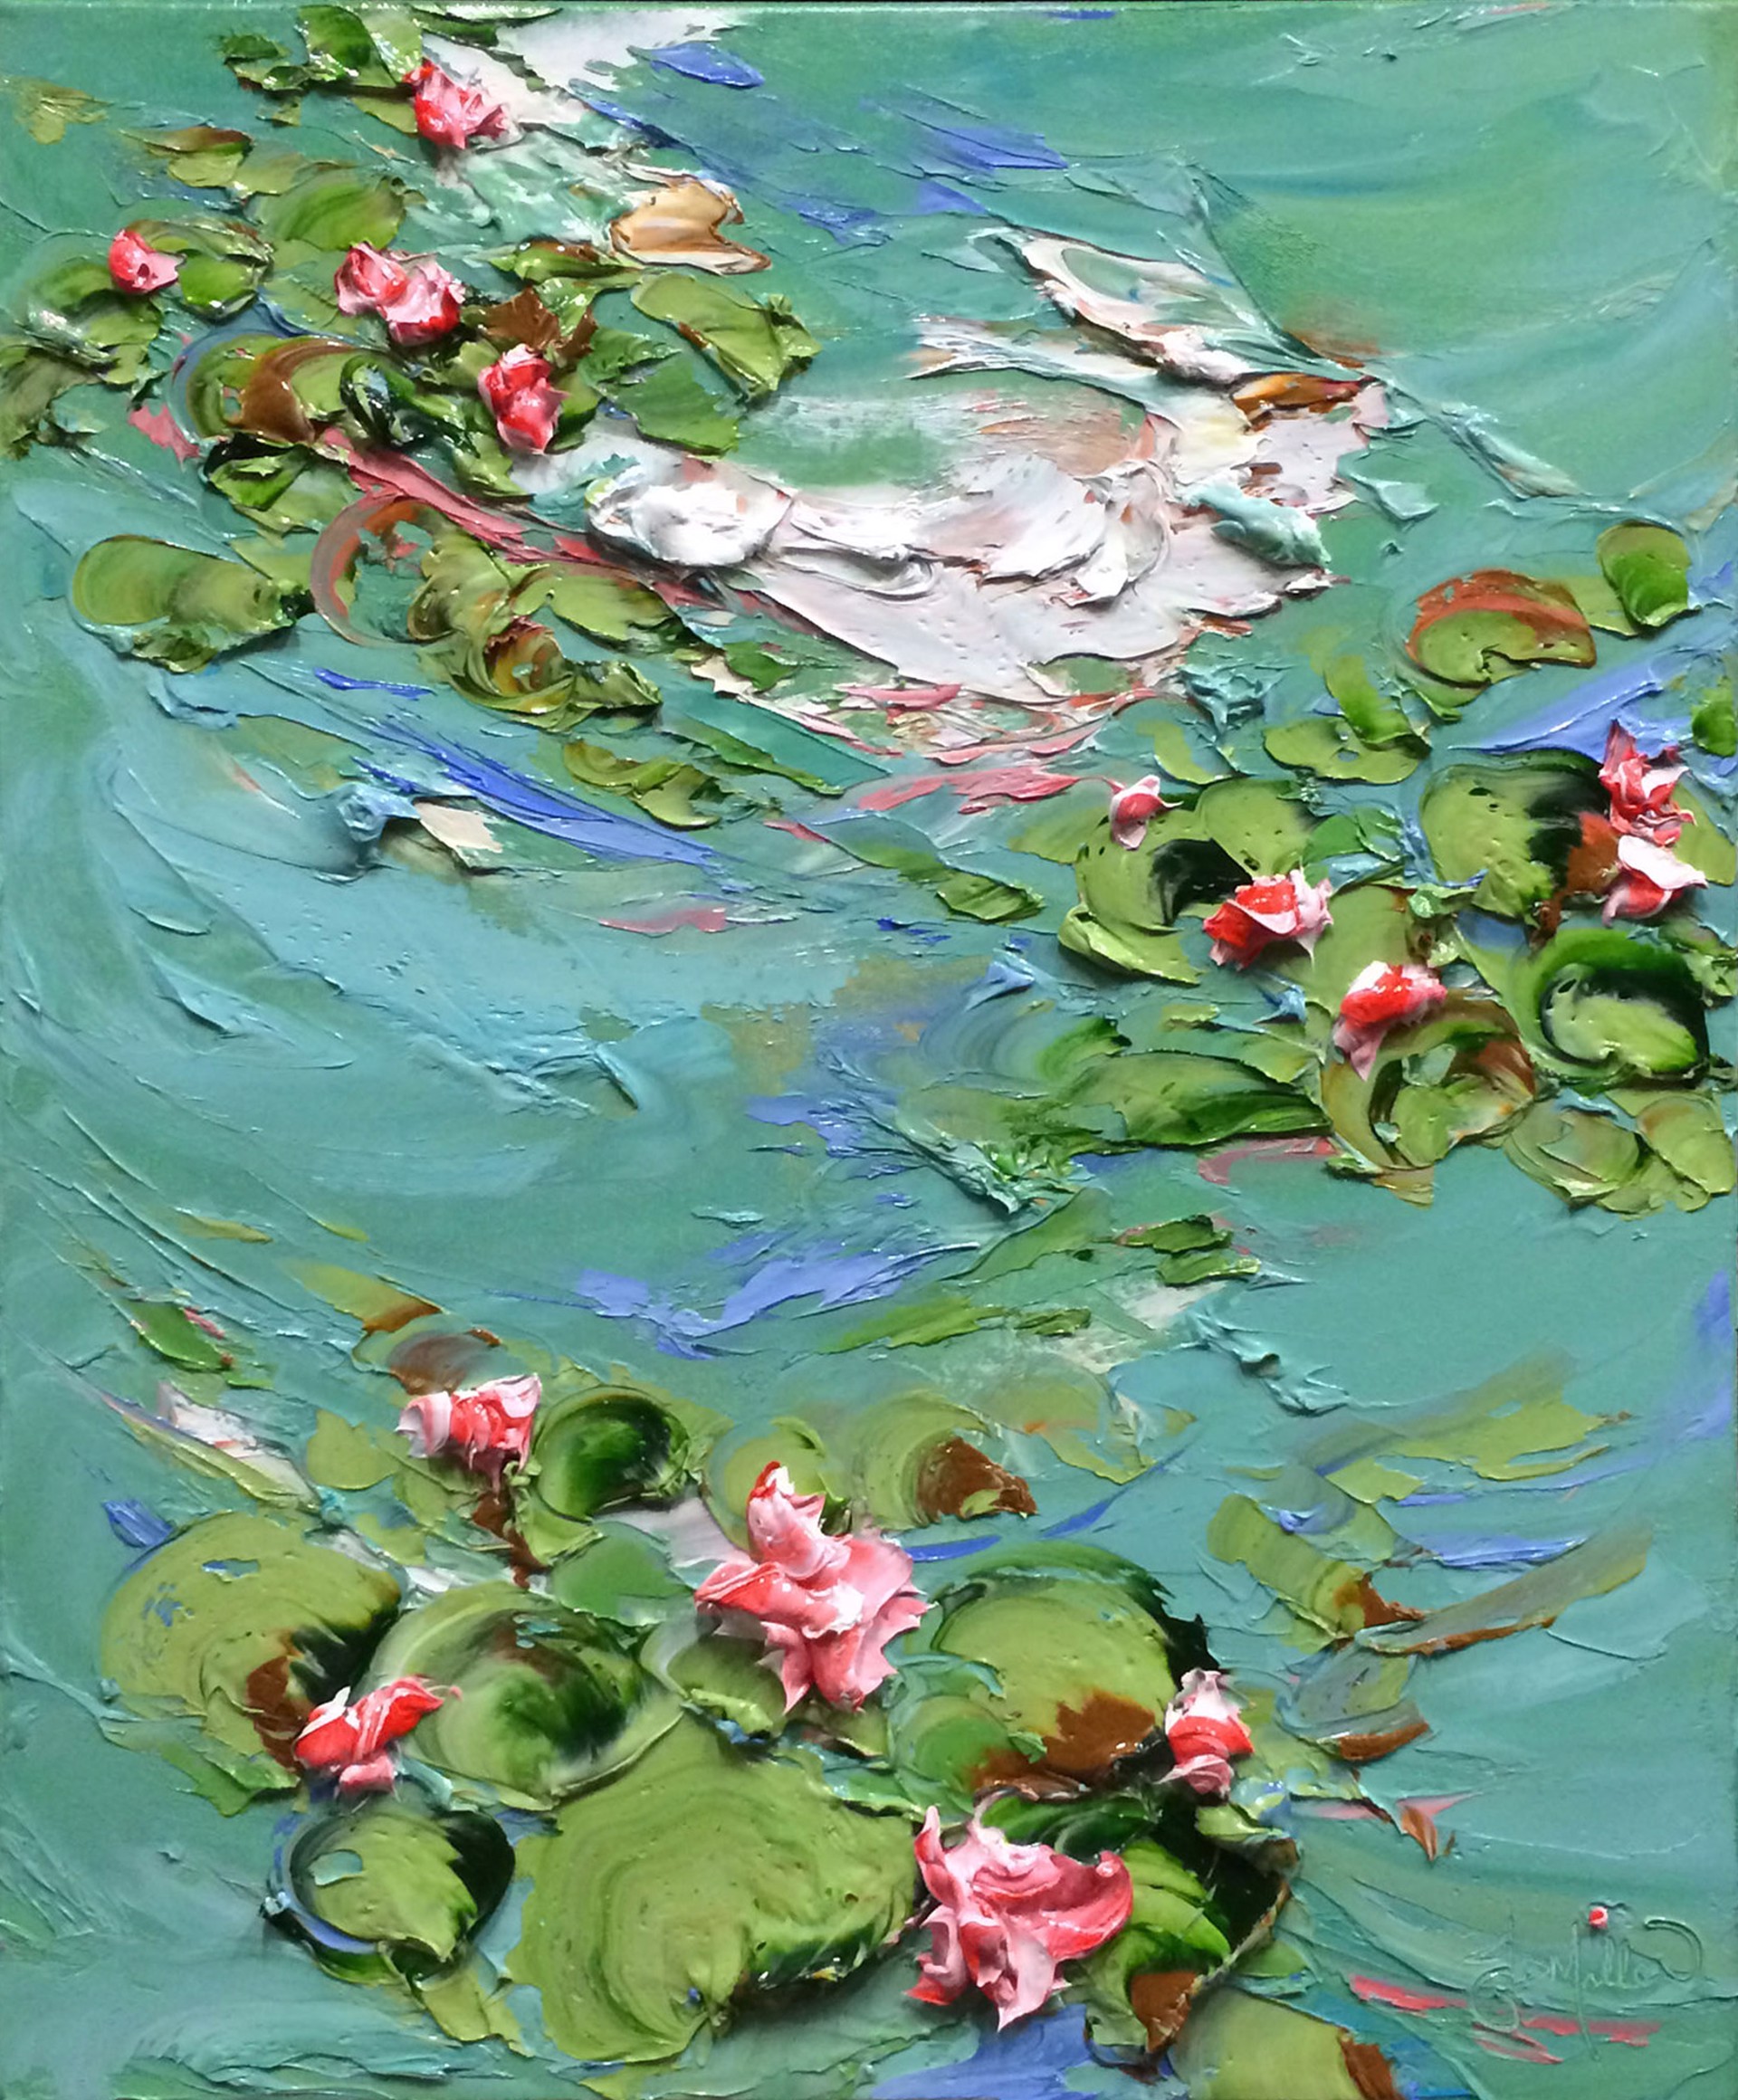 Timeless Waterlilies by JD Miller